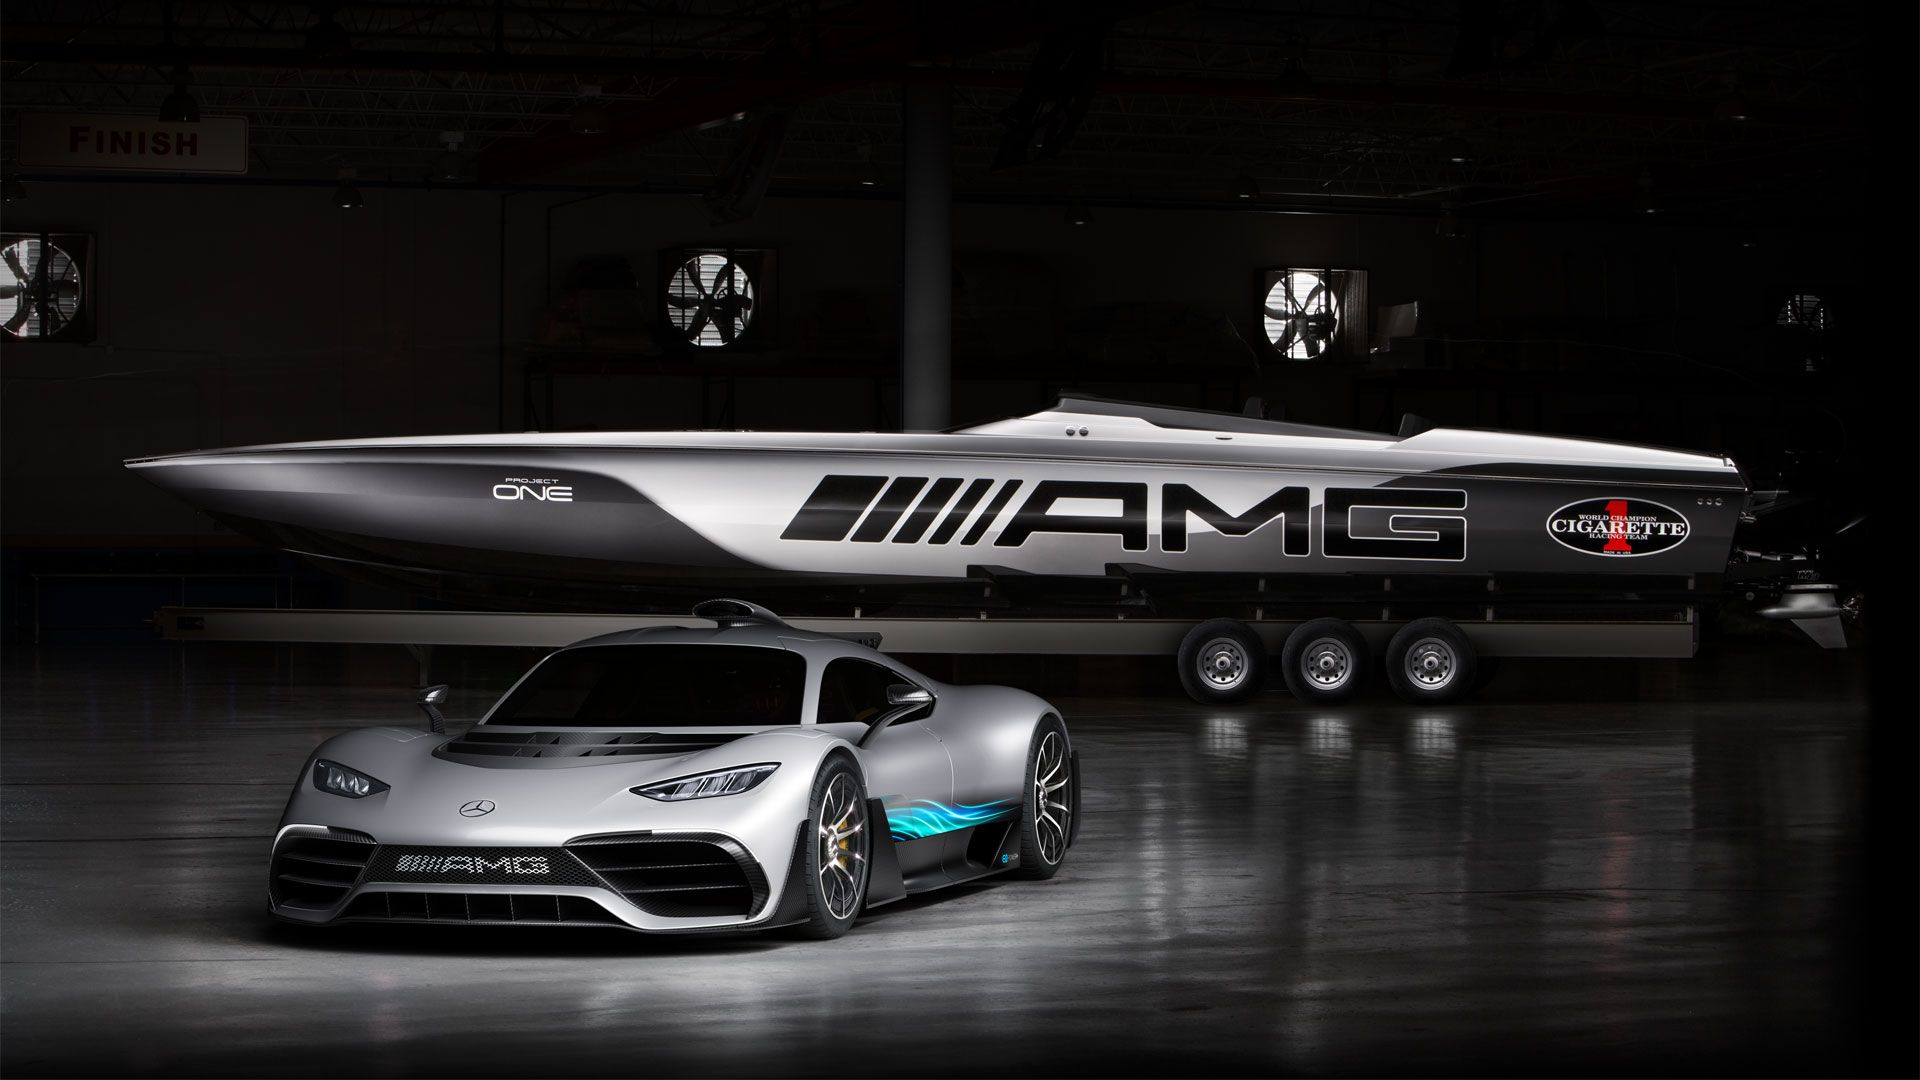 Mercedes AMG Cigarette Racing Luxury Speed Boat Yacht Performance